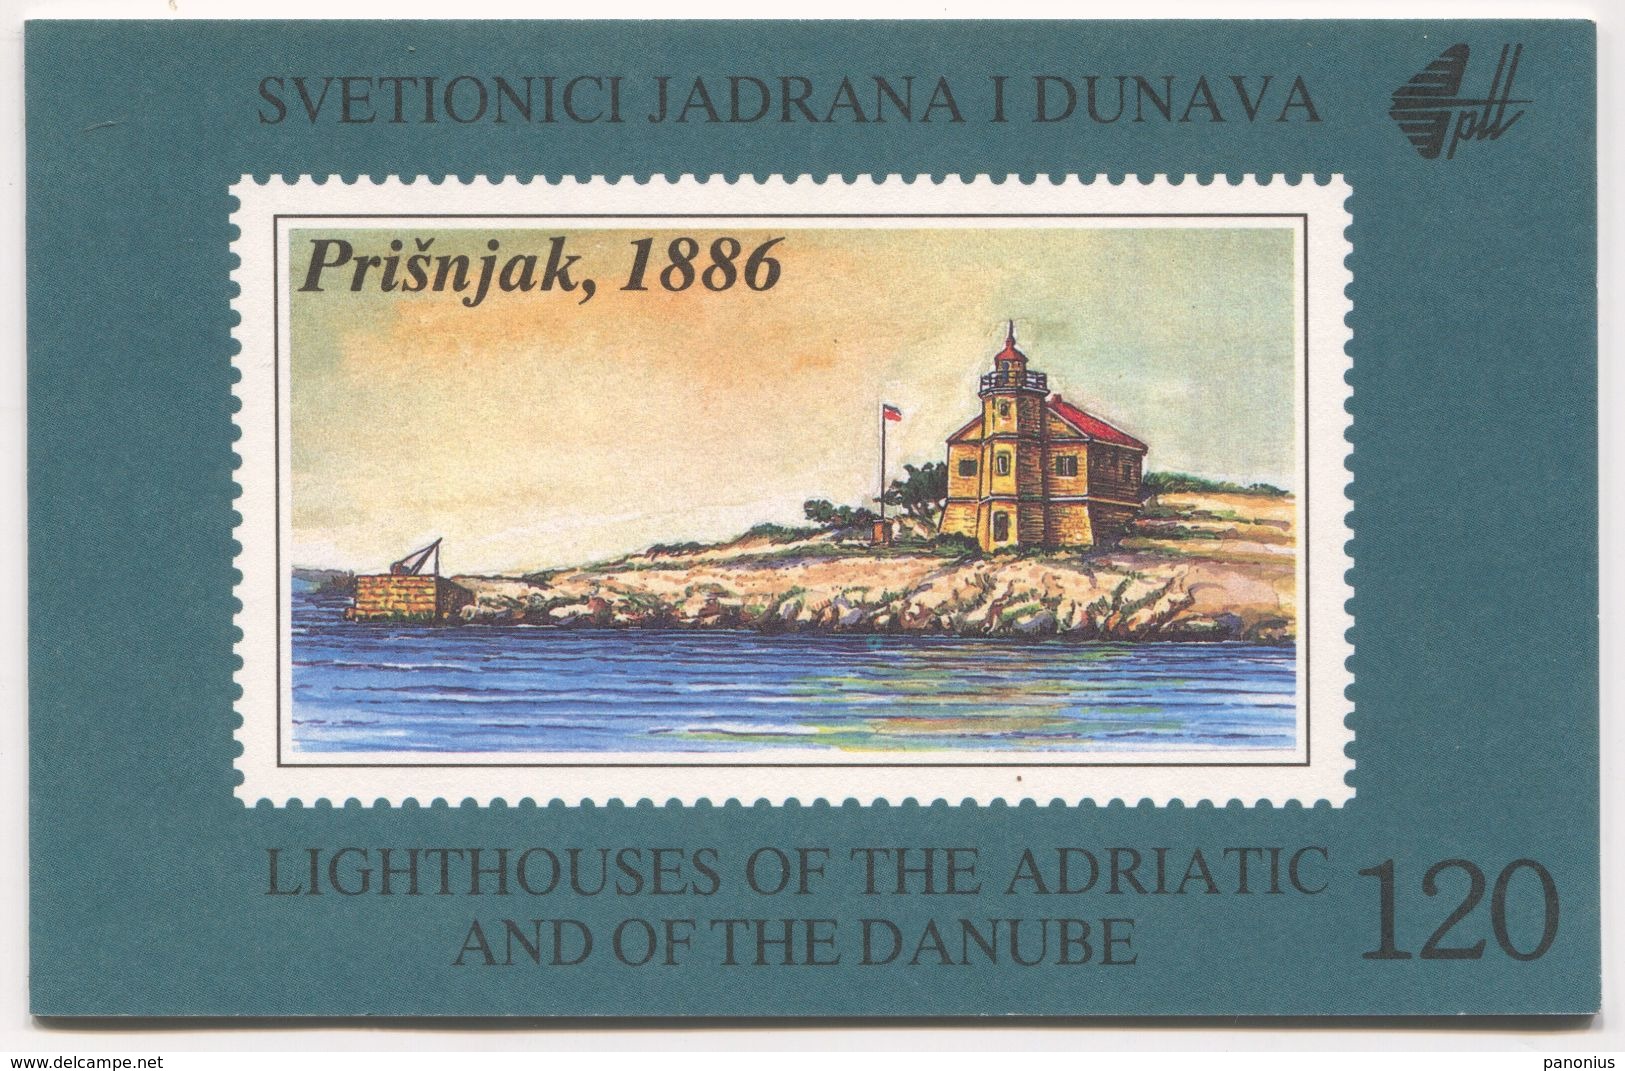 LIGHTHOUSES OF THE ADRIATIC SEA & THE DANUBE, BOOKLET YUGOSLAVIA - Booklets